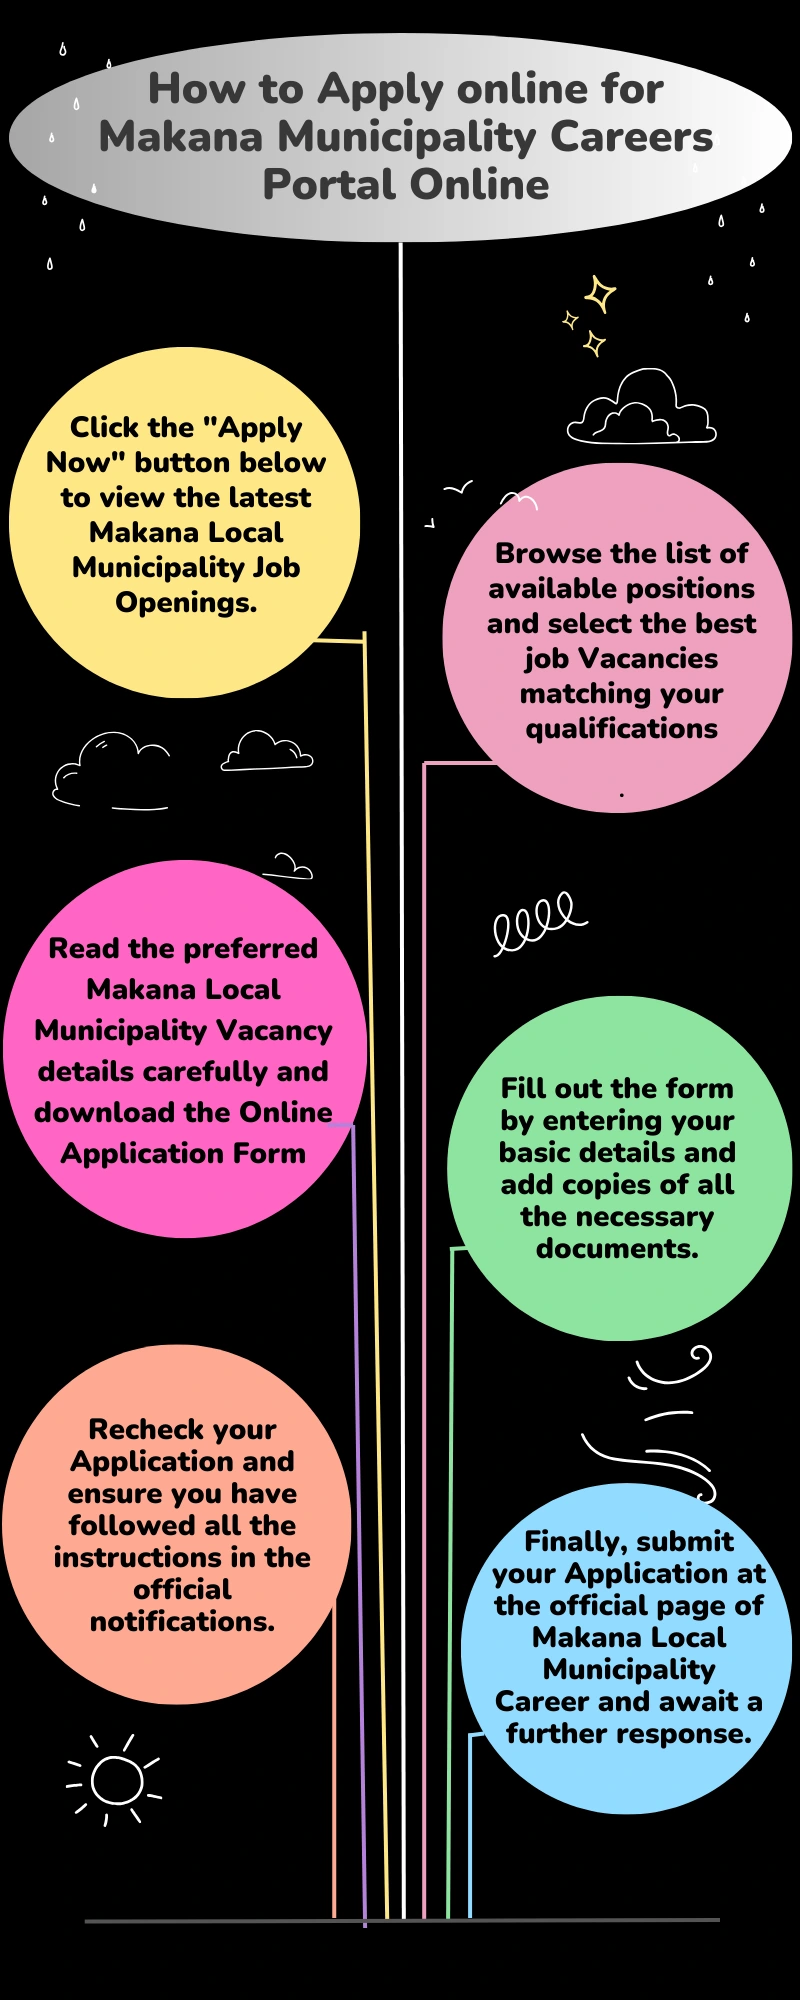 How to Apply online for Makana Municipality Careers Portal Online